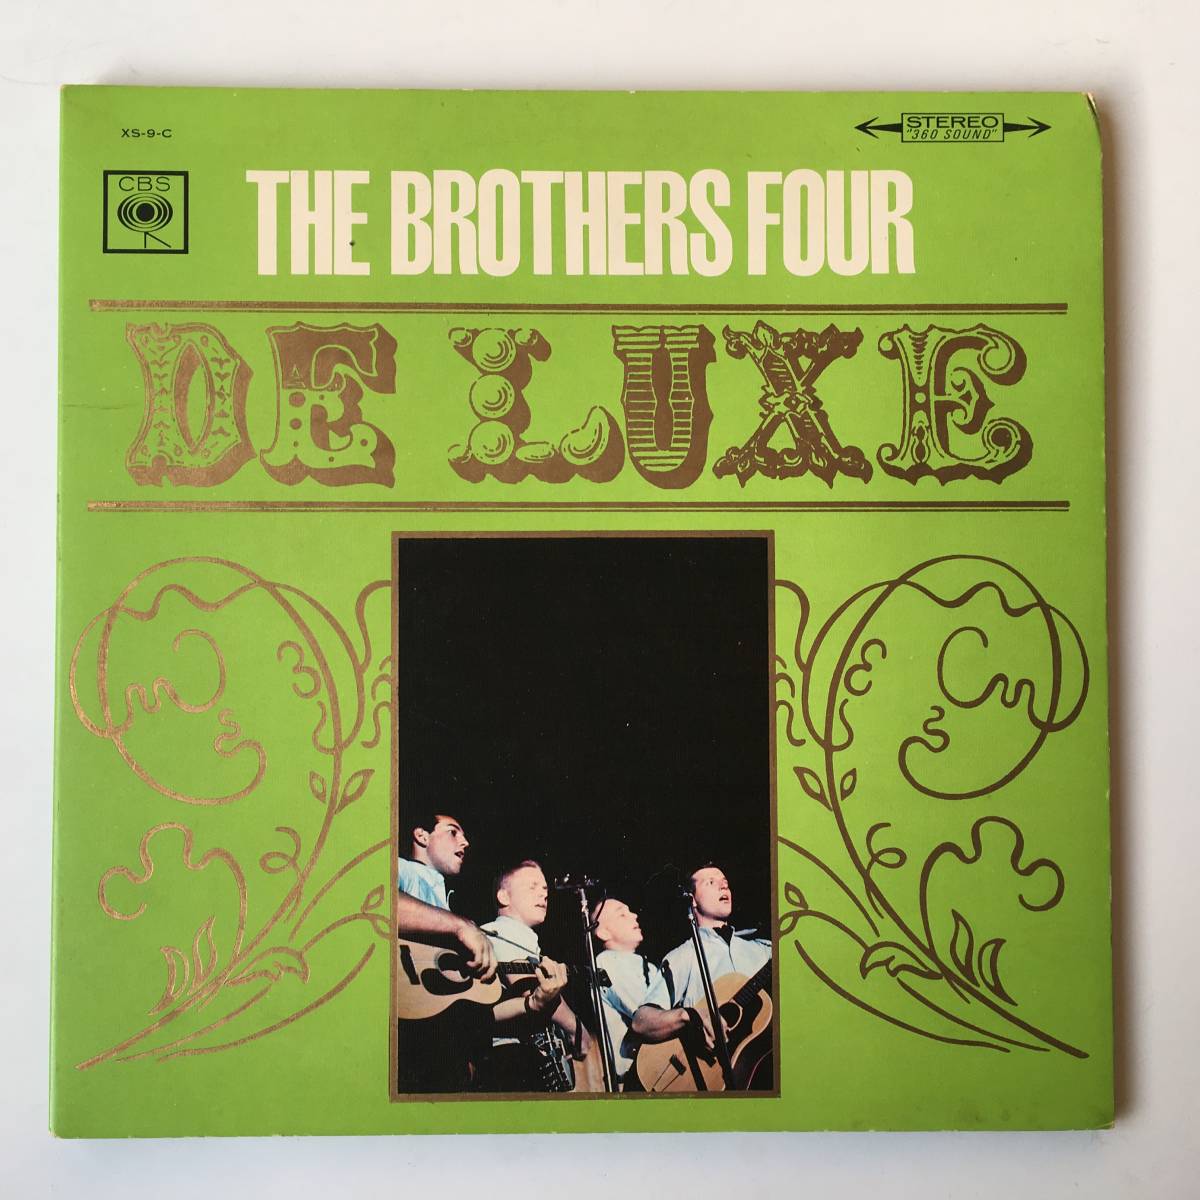 221226●The Brothers Four - De Luxe/XS-9-C/ブラザース・フォア/1966年/12inch LP アナログ盤の画像1